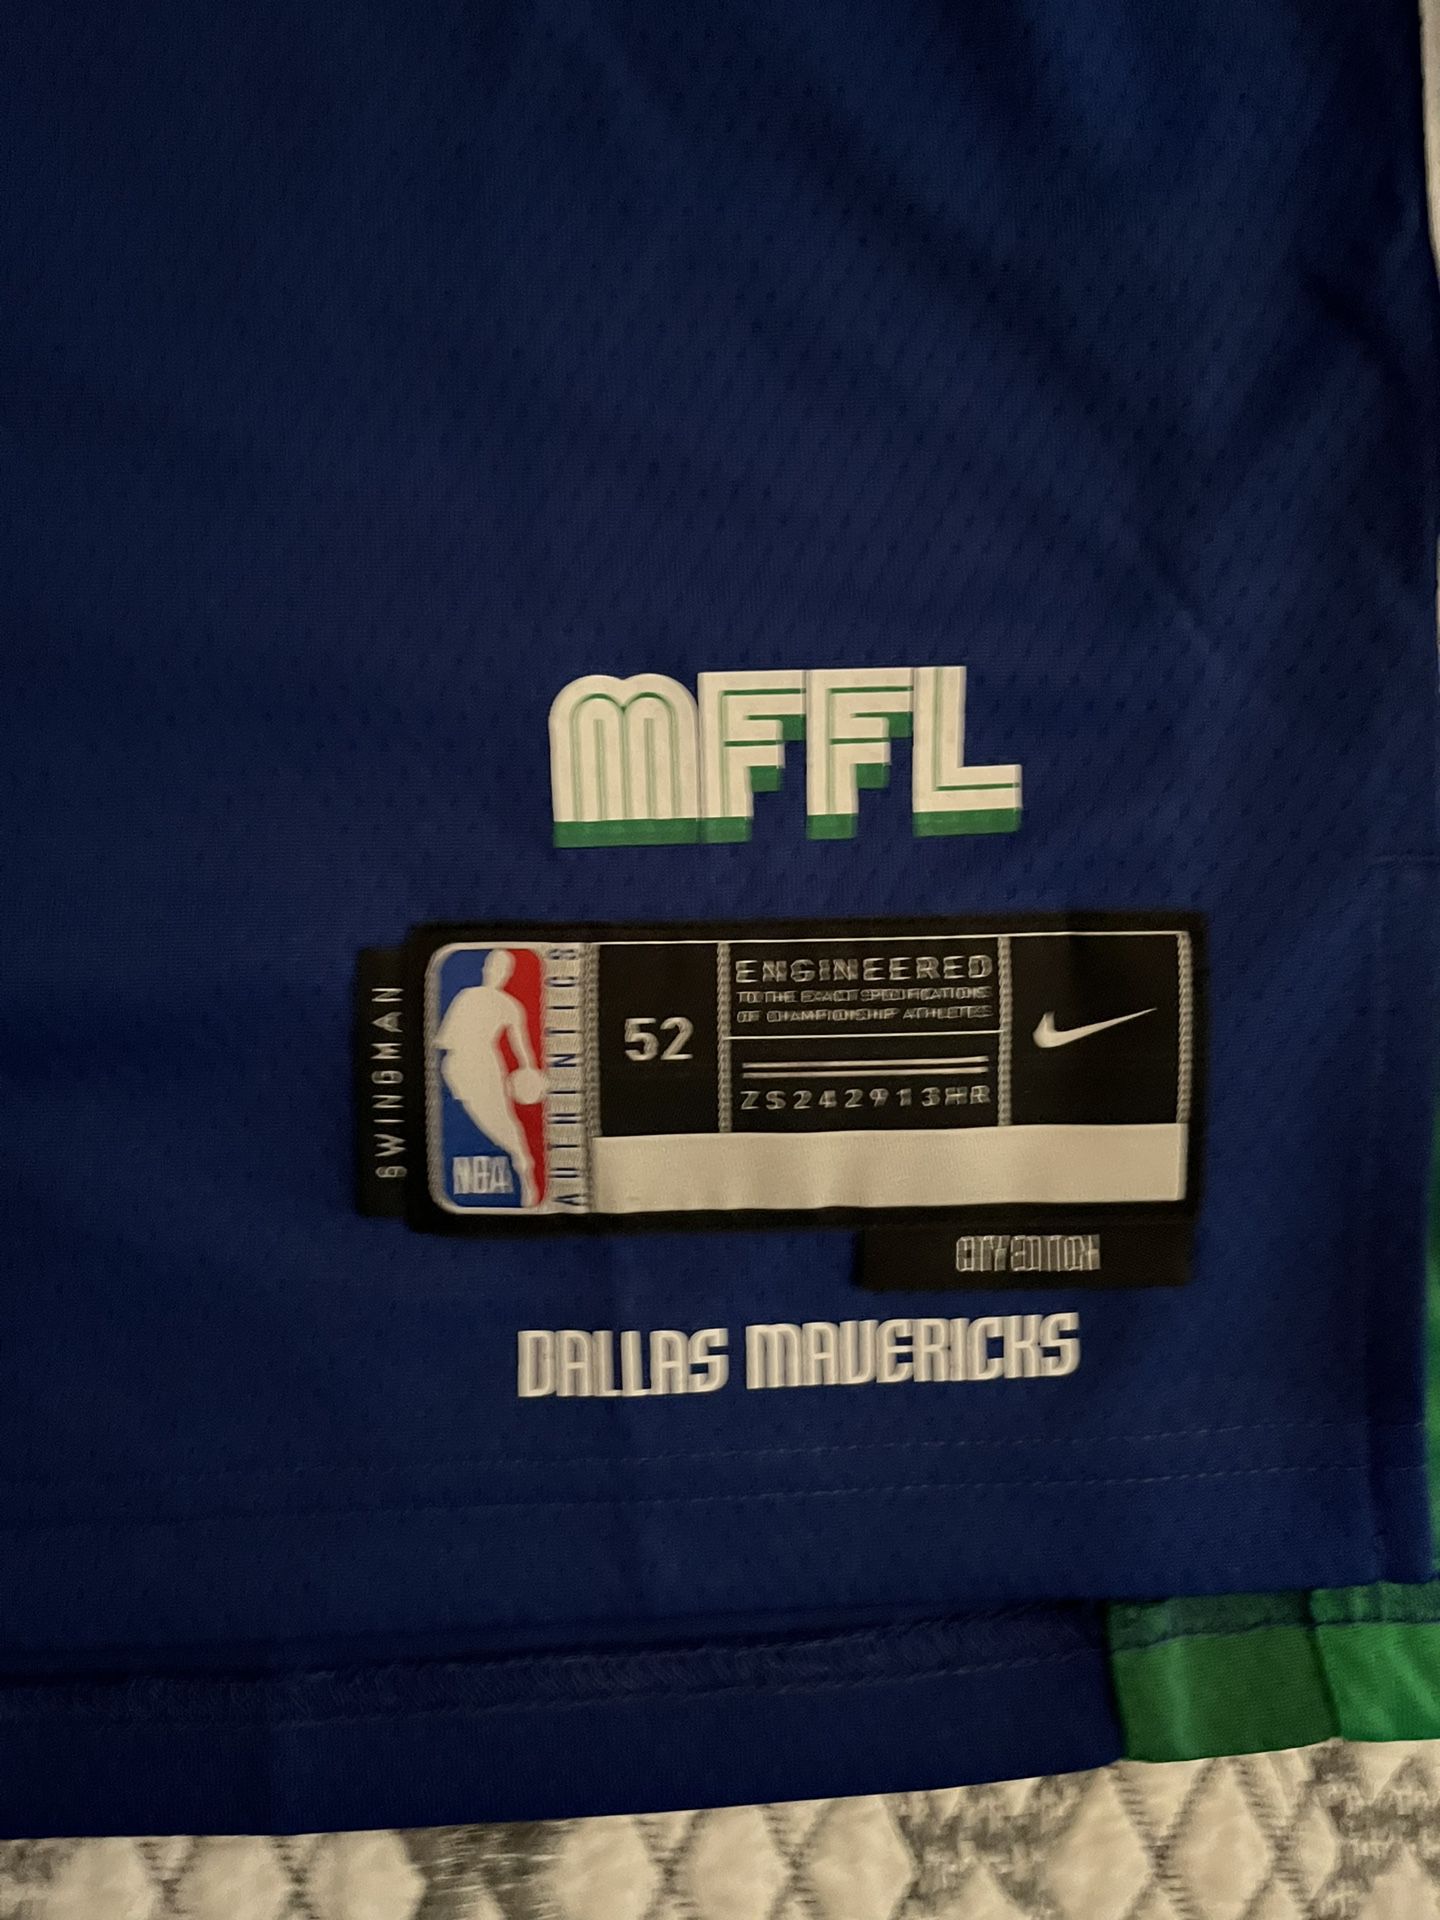 Dallas Mavericks Luka Doncic Jersey for Sale in Indio, CA - OfferUp